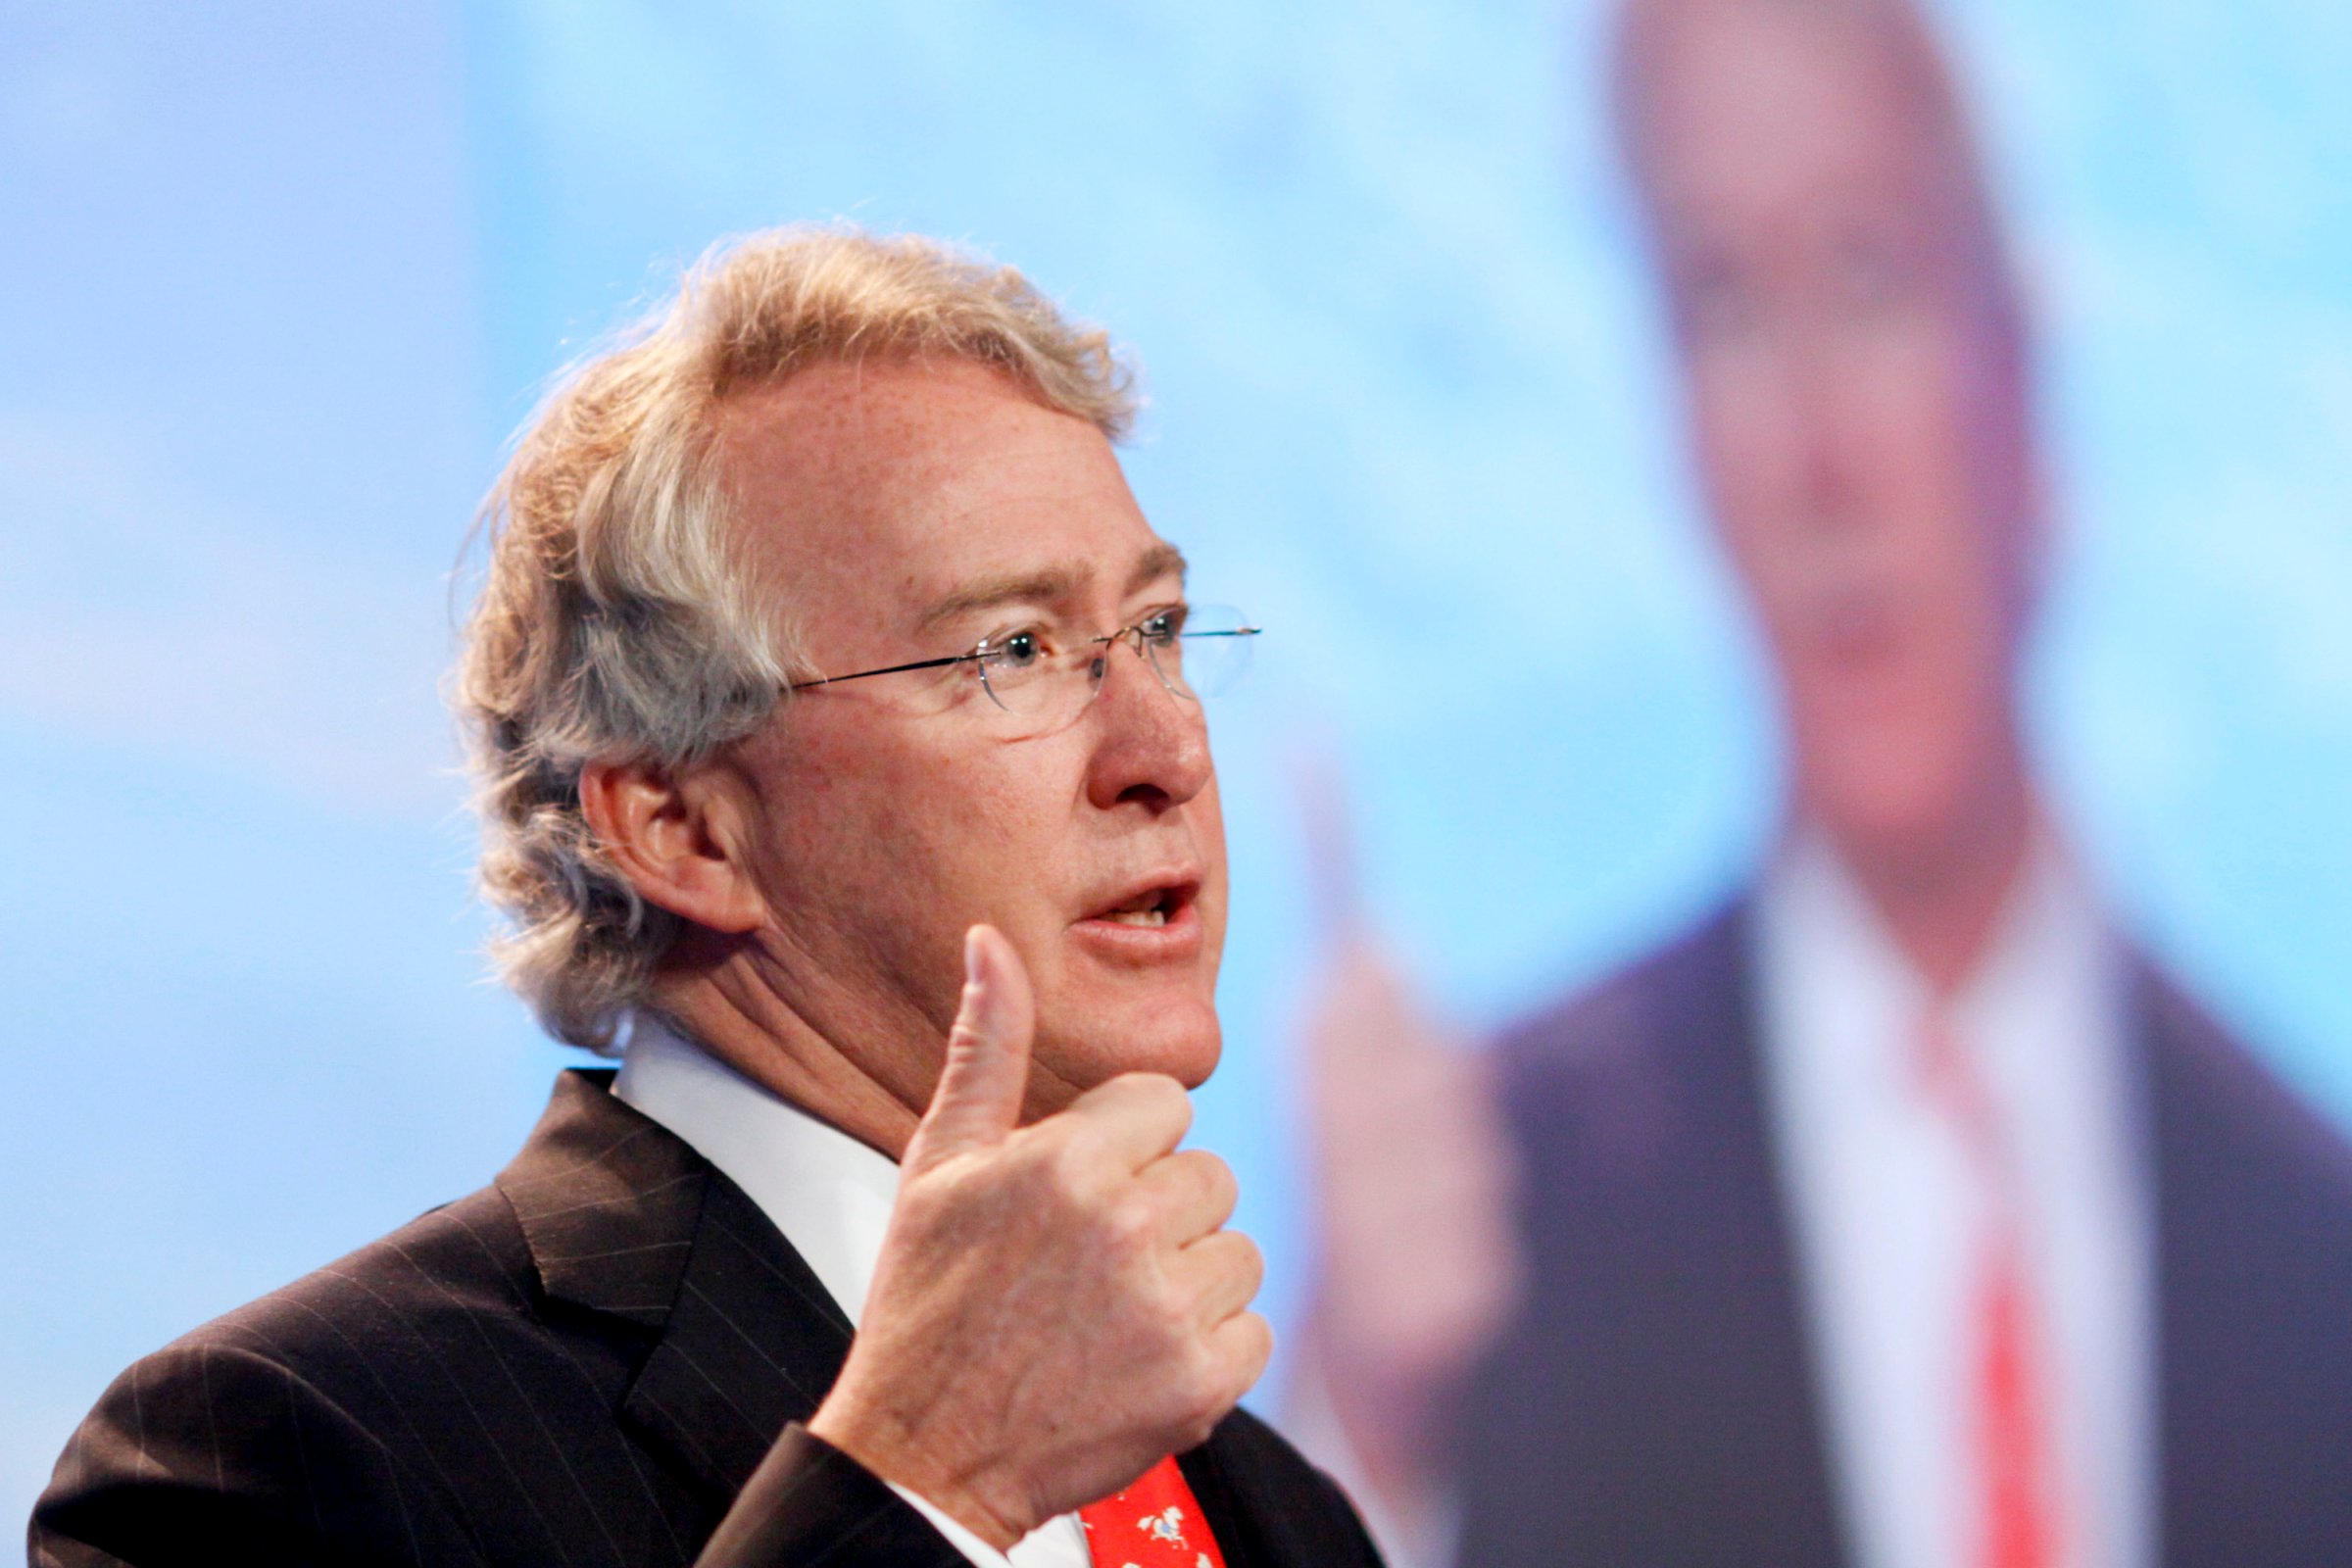 Aubrey McClendon, chairman and chief executive officer of Ch